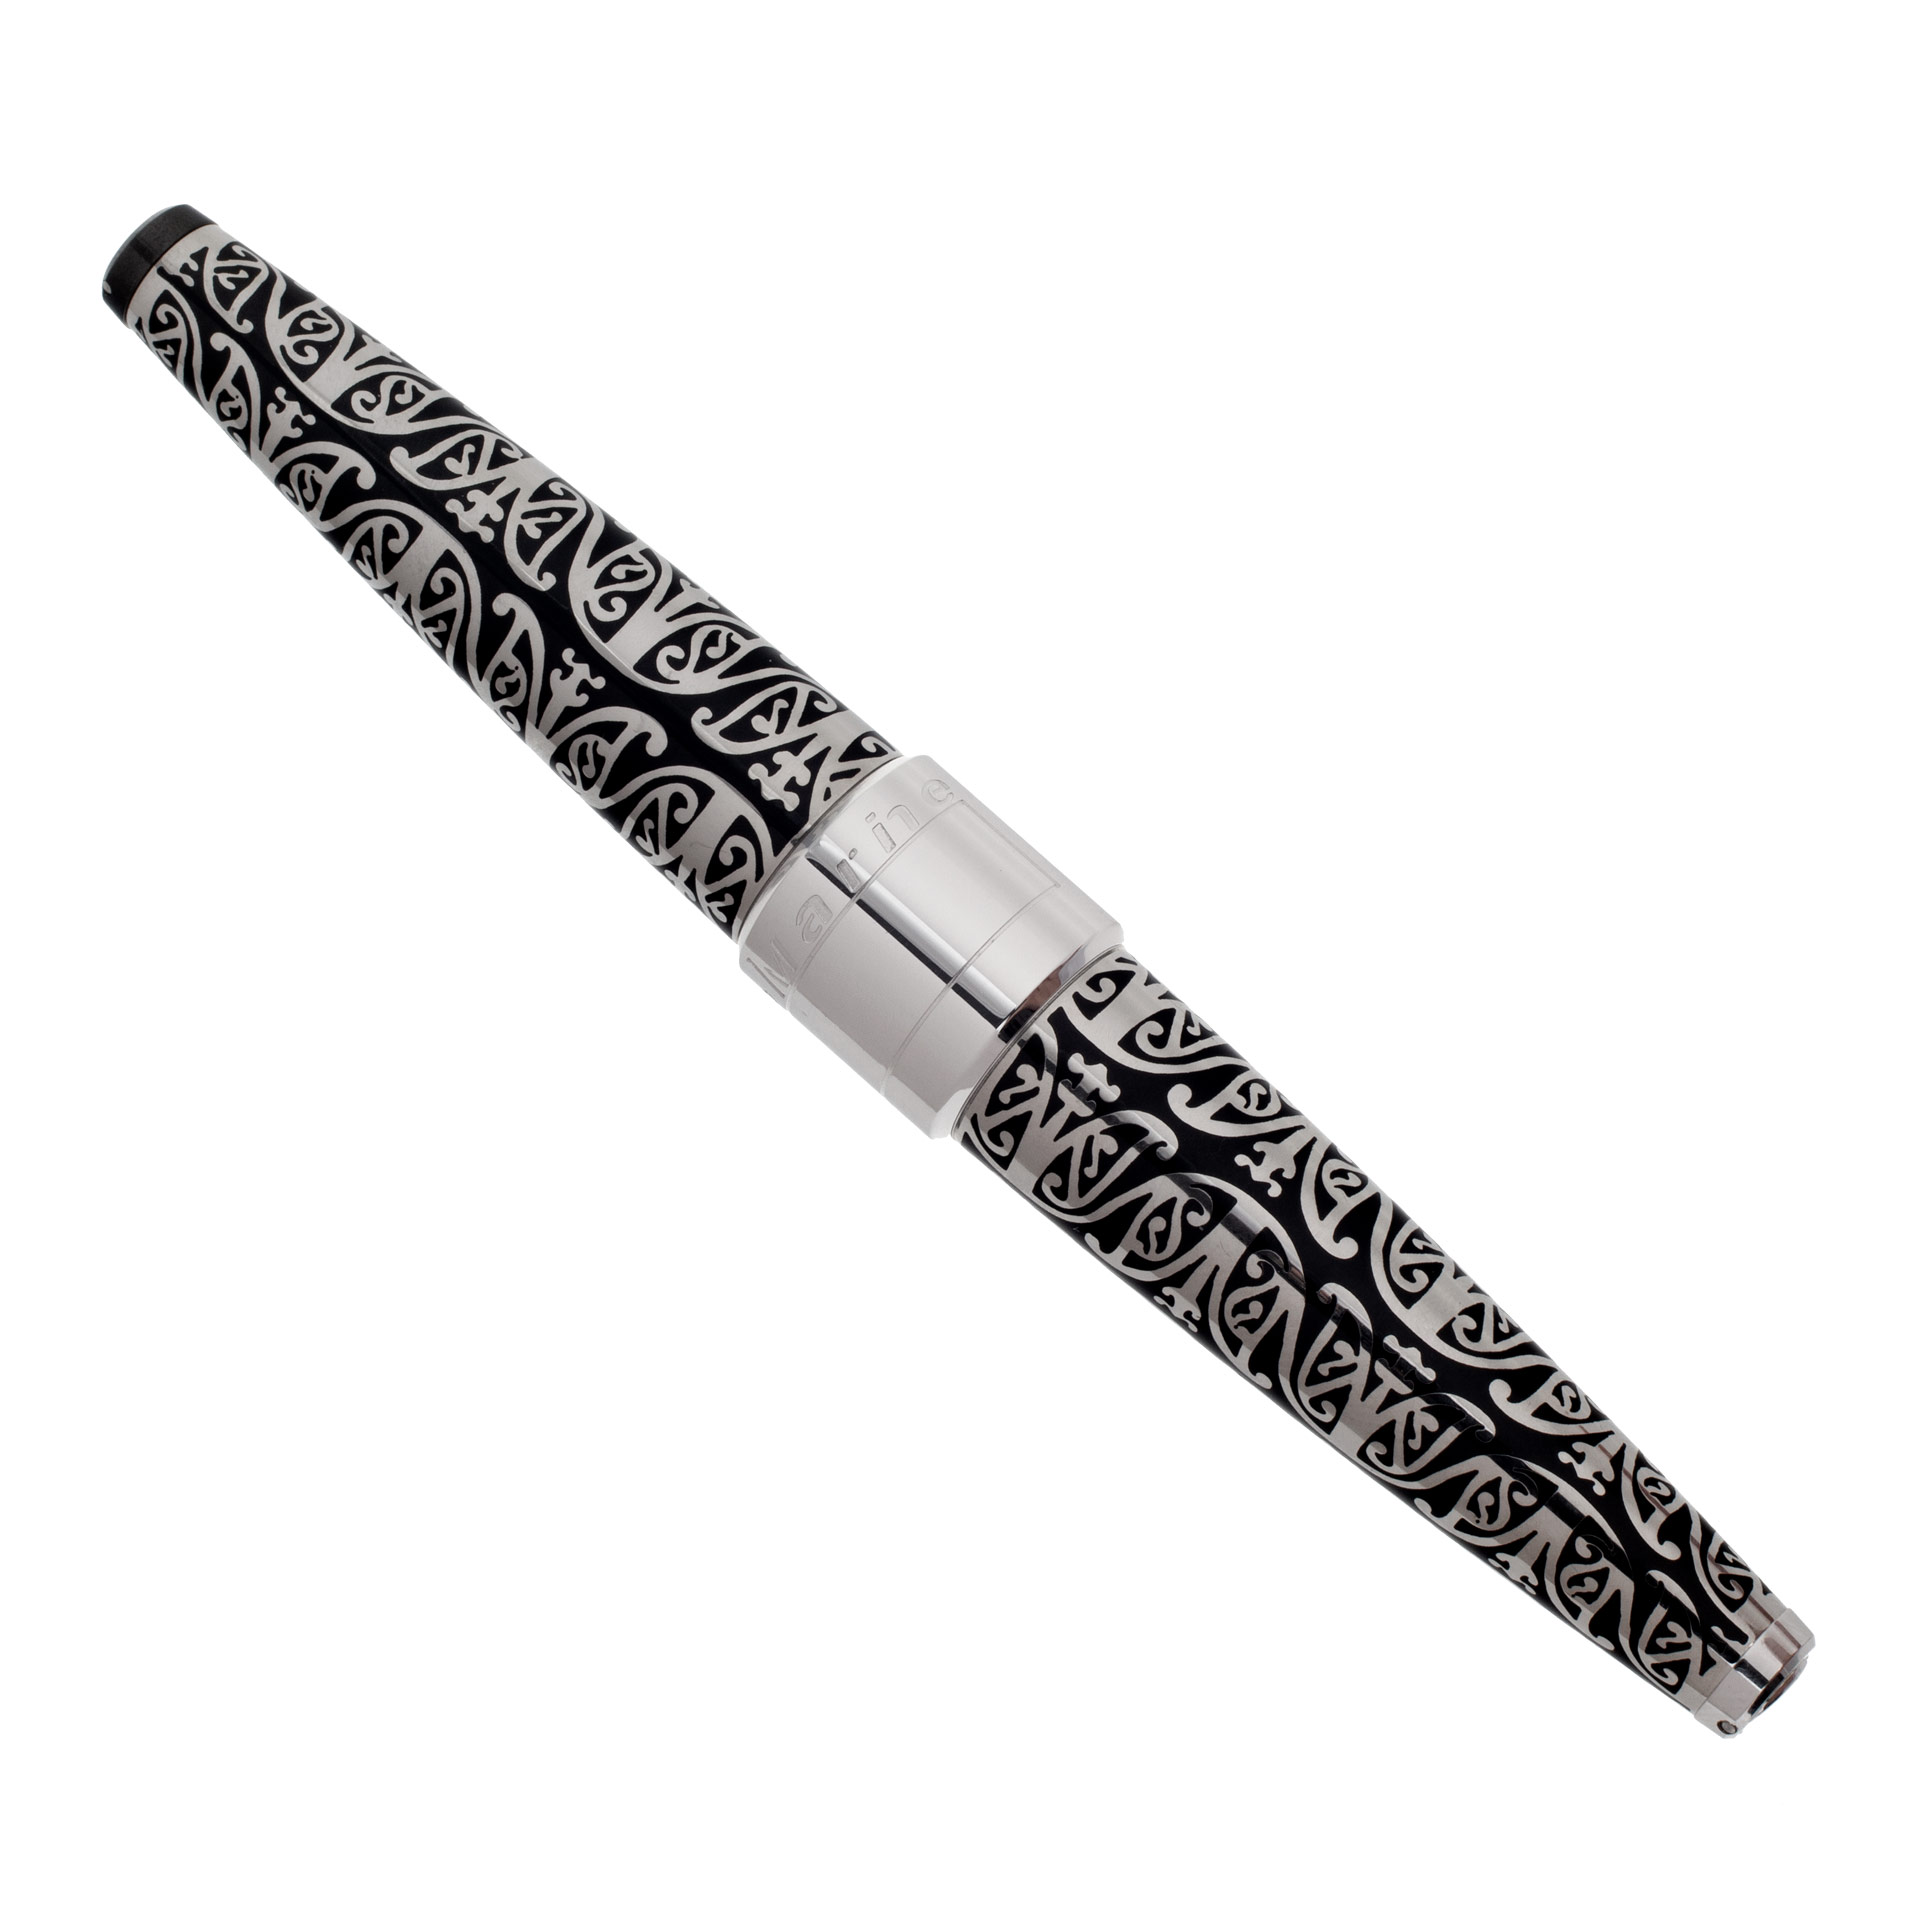 TechnoMarine Maori limited edition ball point pen. Made in France. image 1